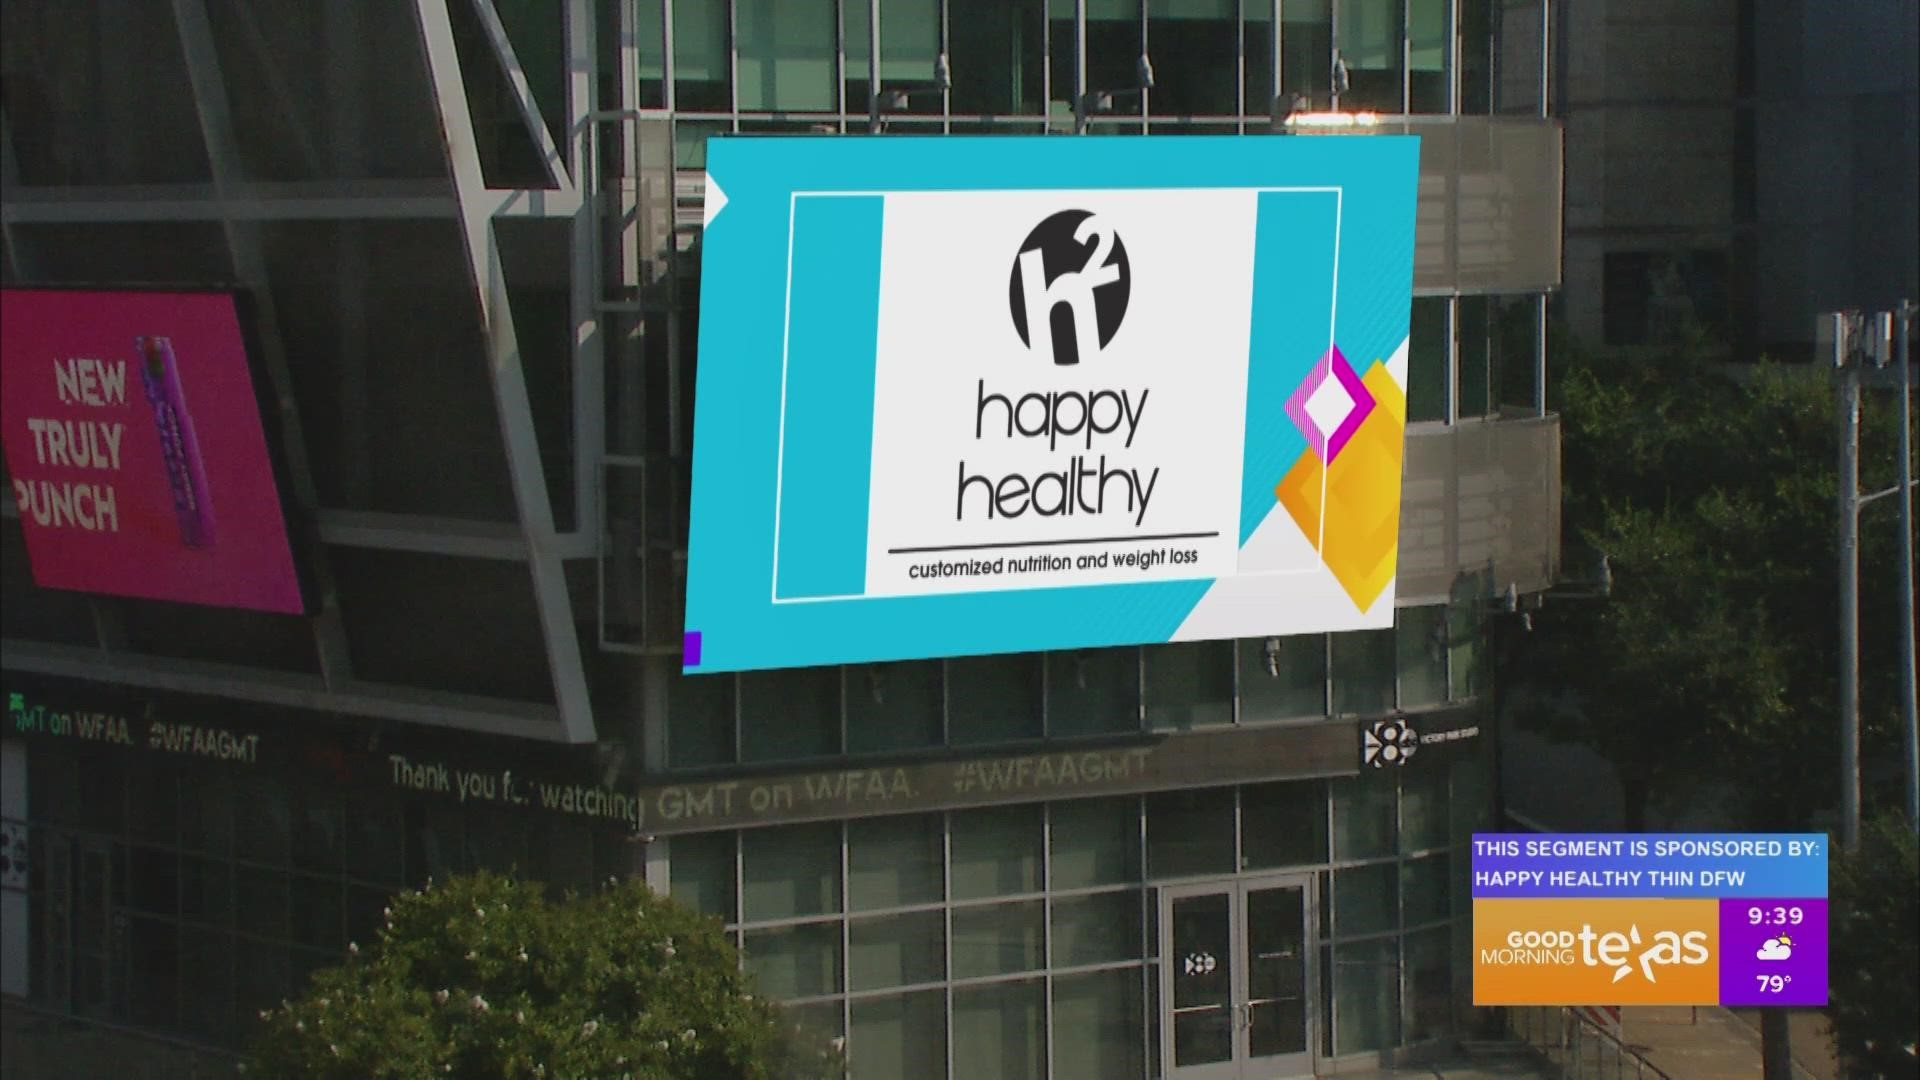 This segment is sponsored by Happy Healthy Thin DFW. Go to H2ThinTV.com for more information.